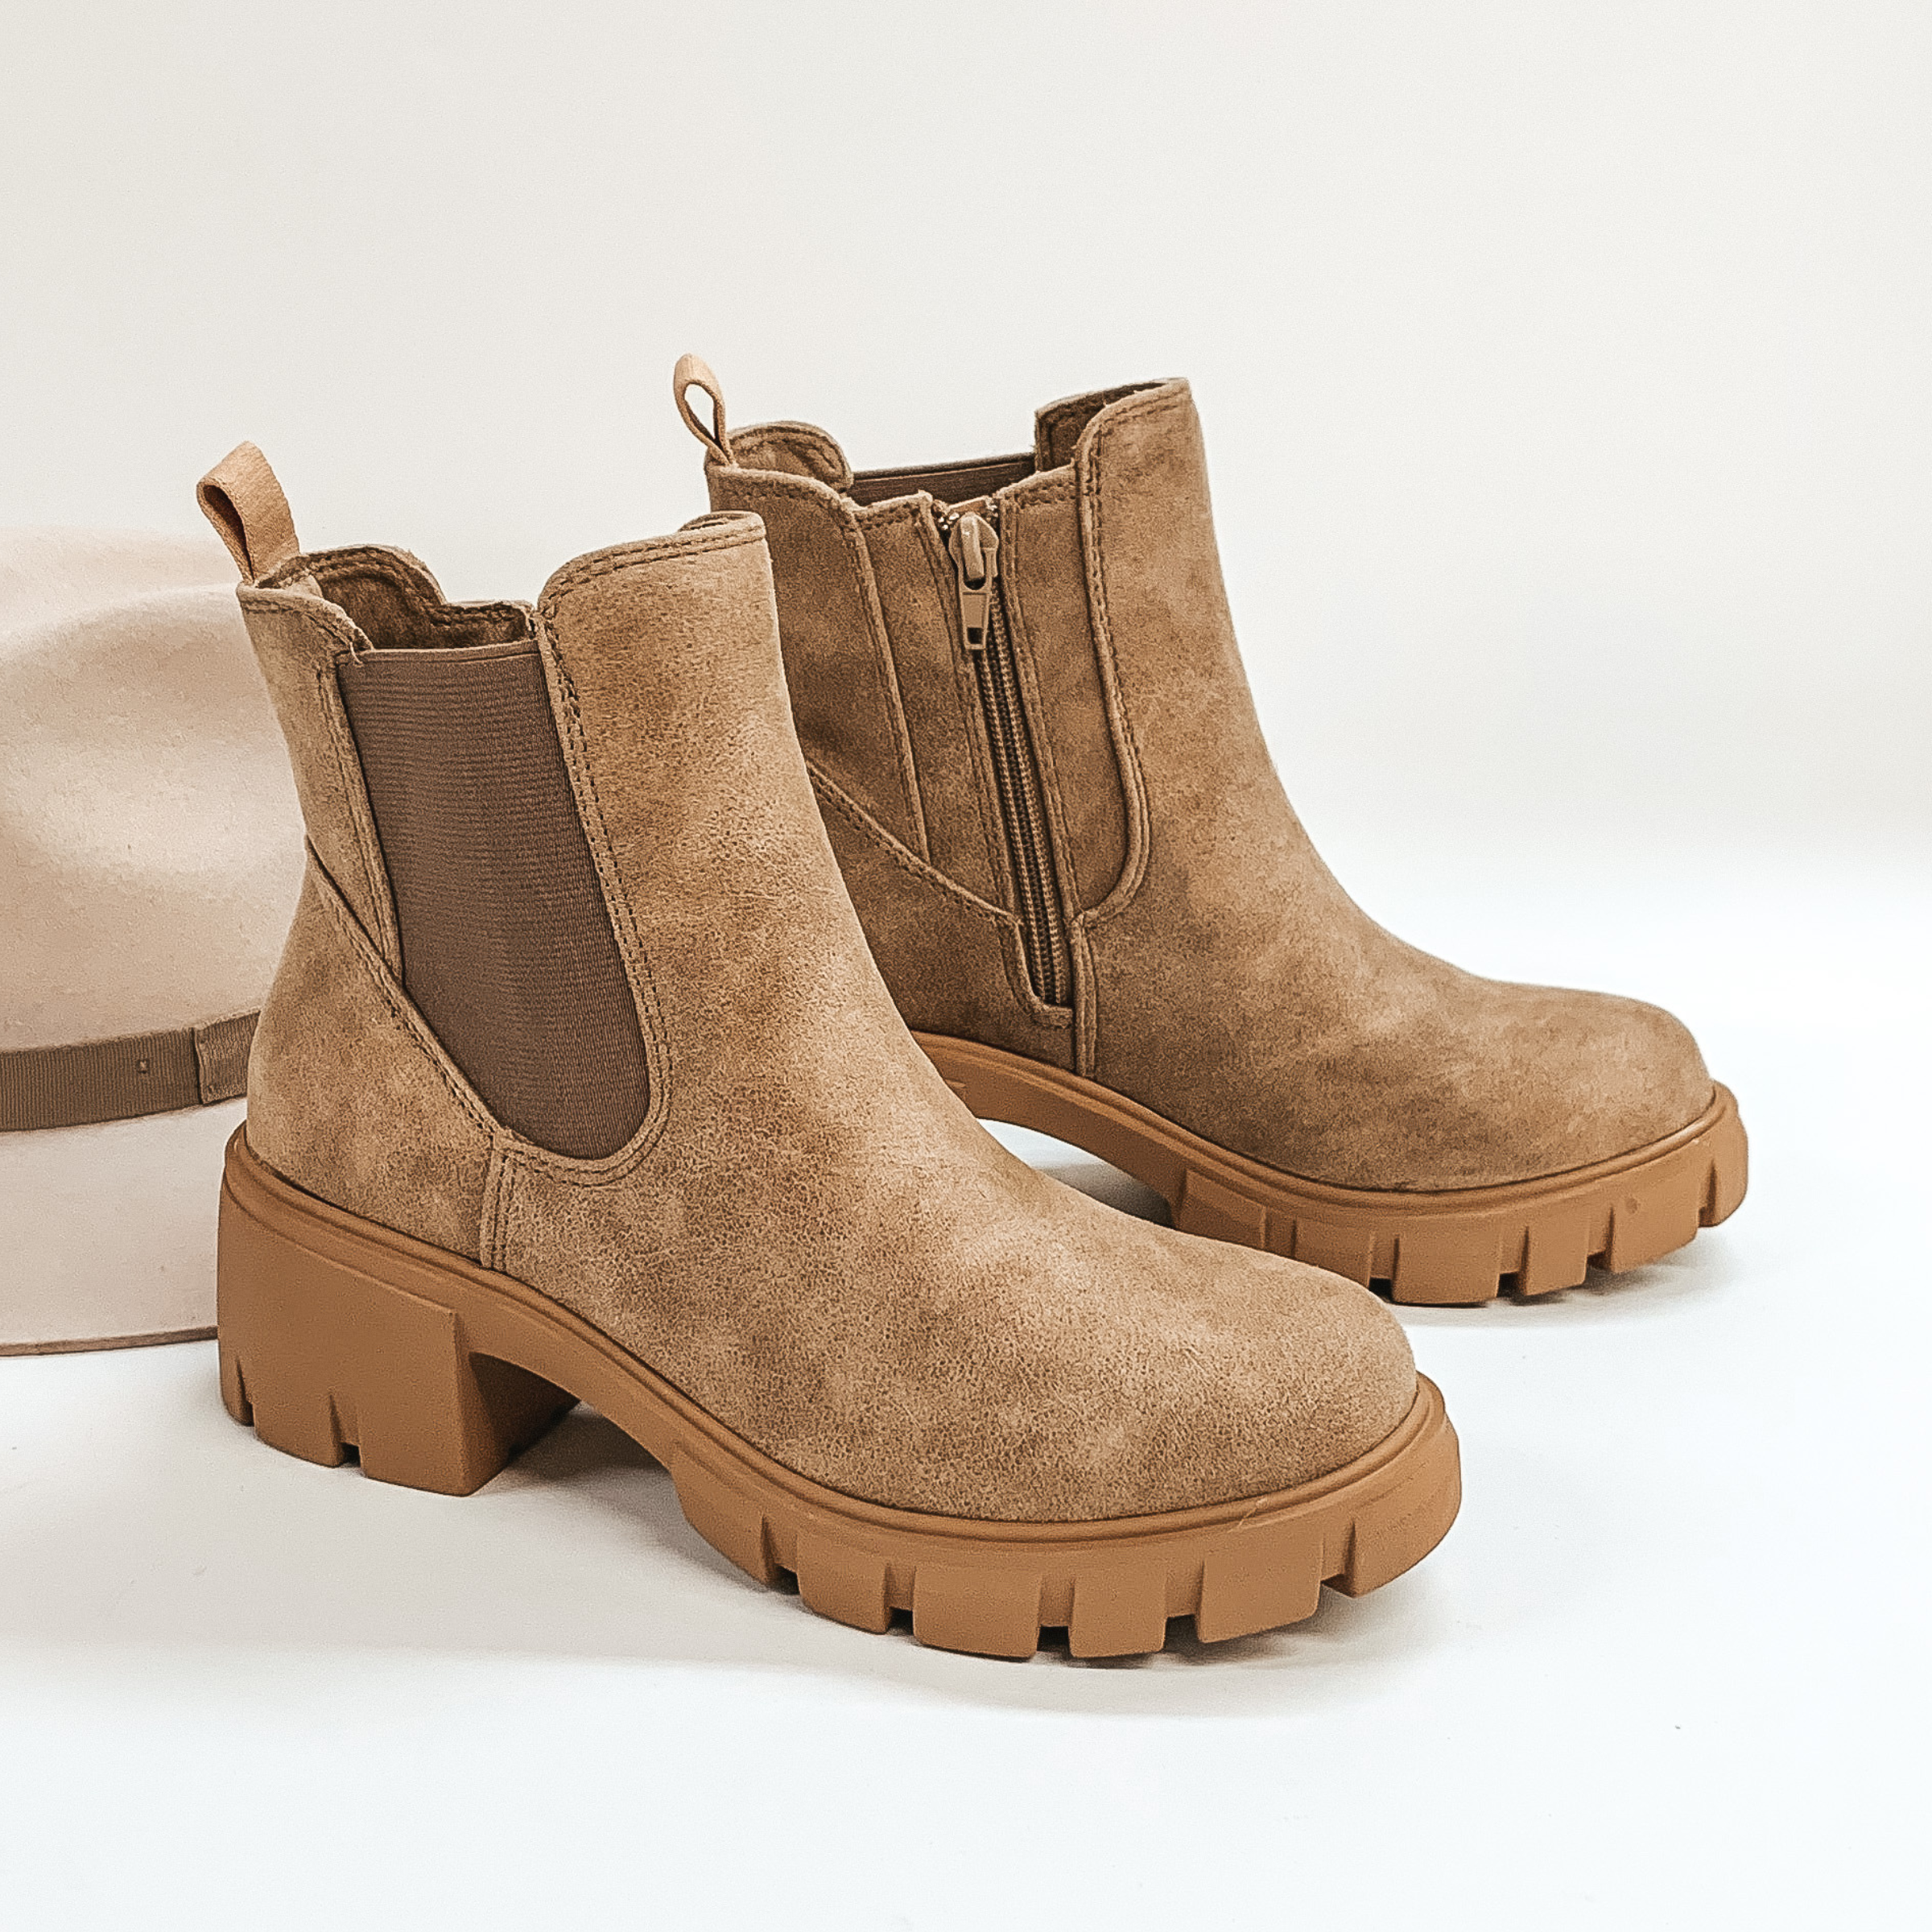 Very G | Coffee Shop Date Heeled Booties in Taupe - Giddy Up Glamour Boutique